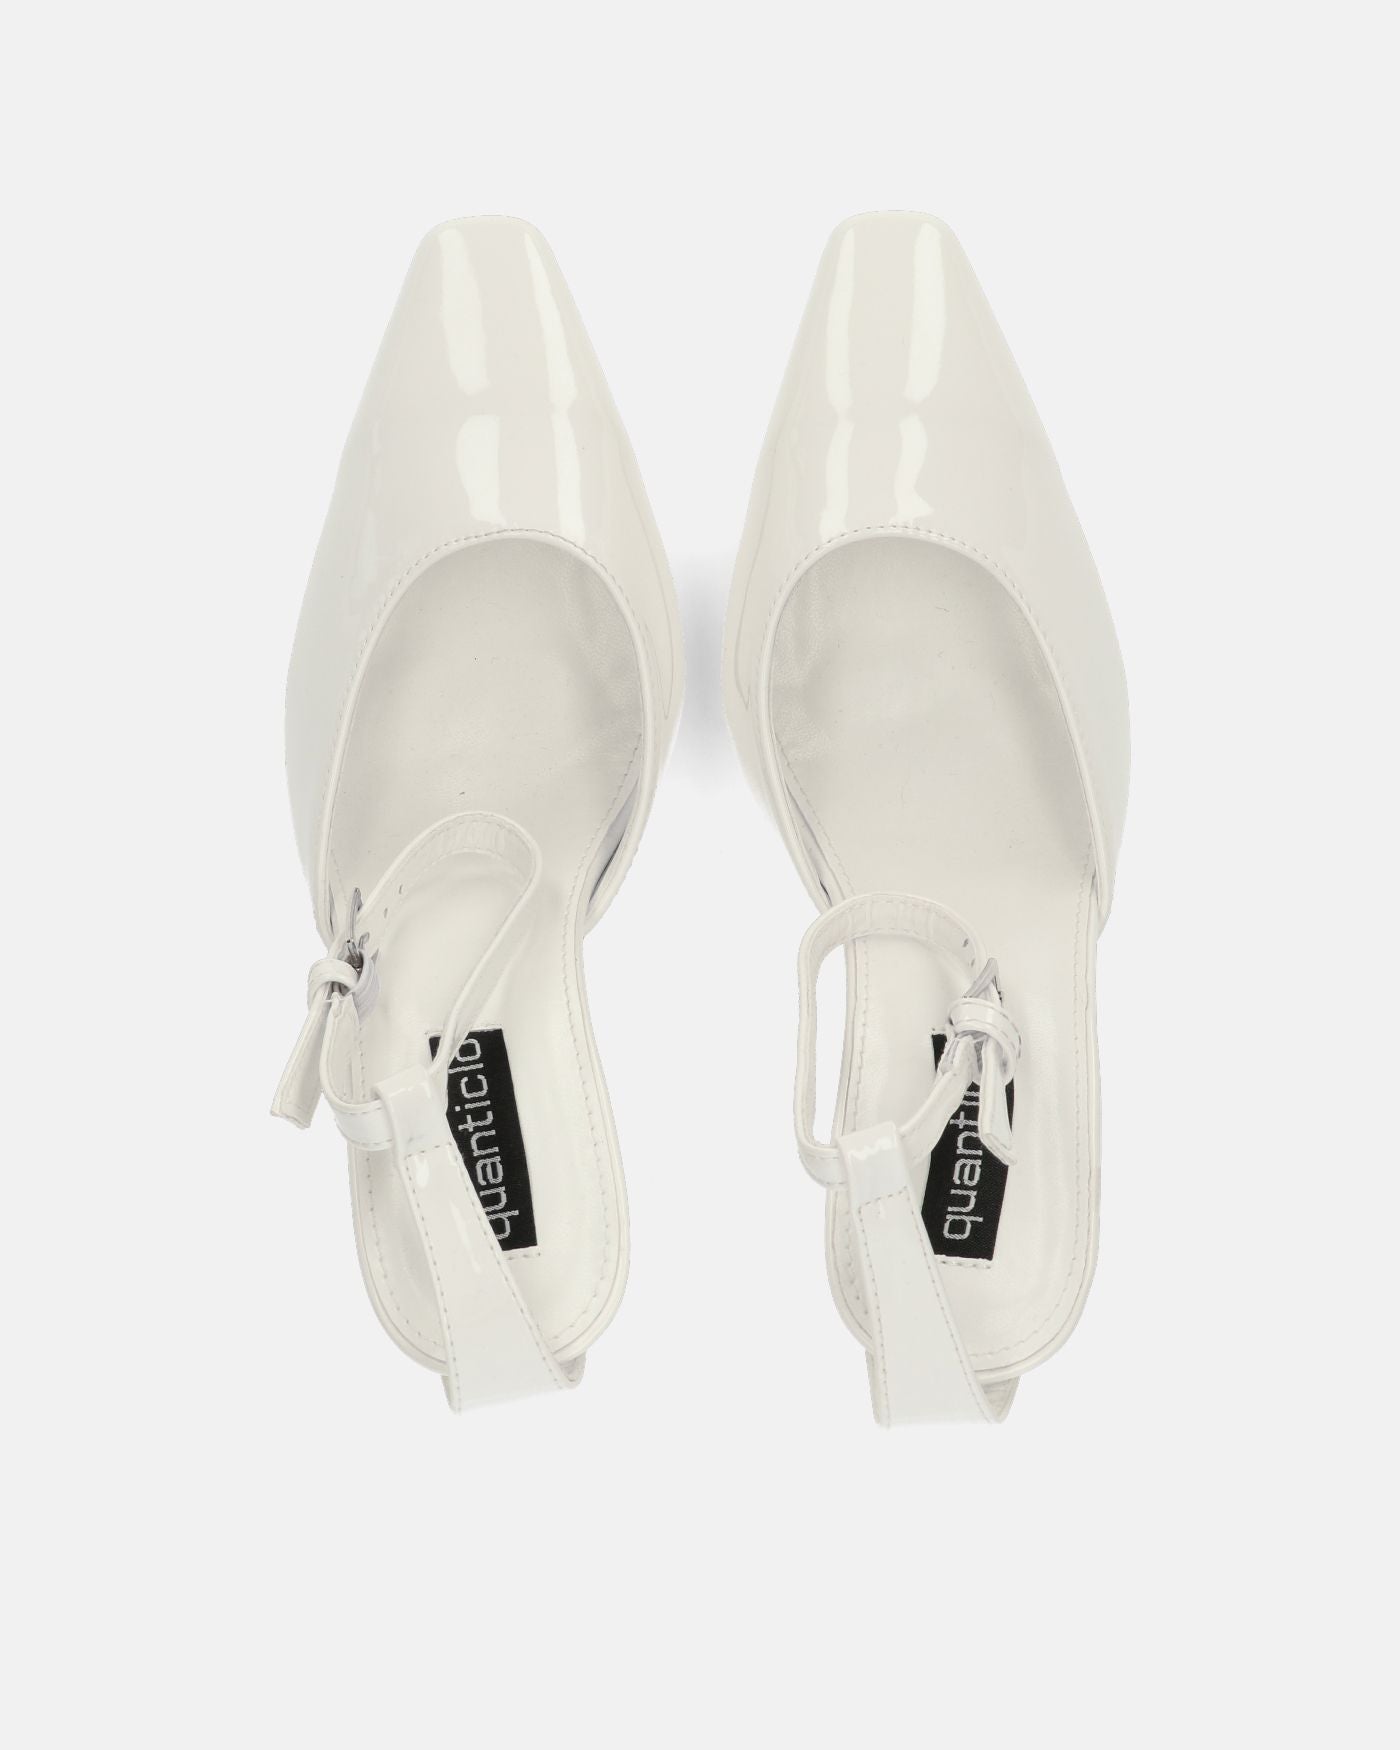 LUDWIKA - shoes with heel and strap in white glassy